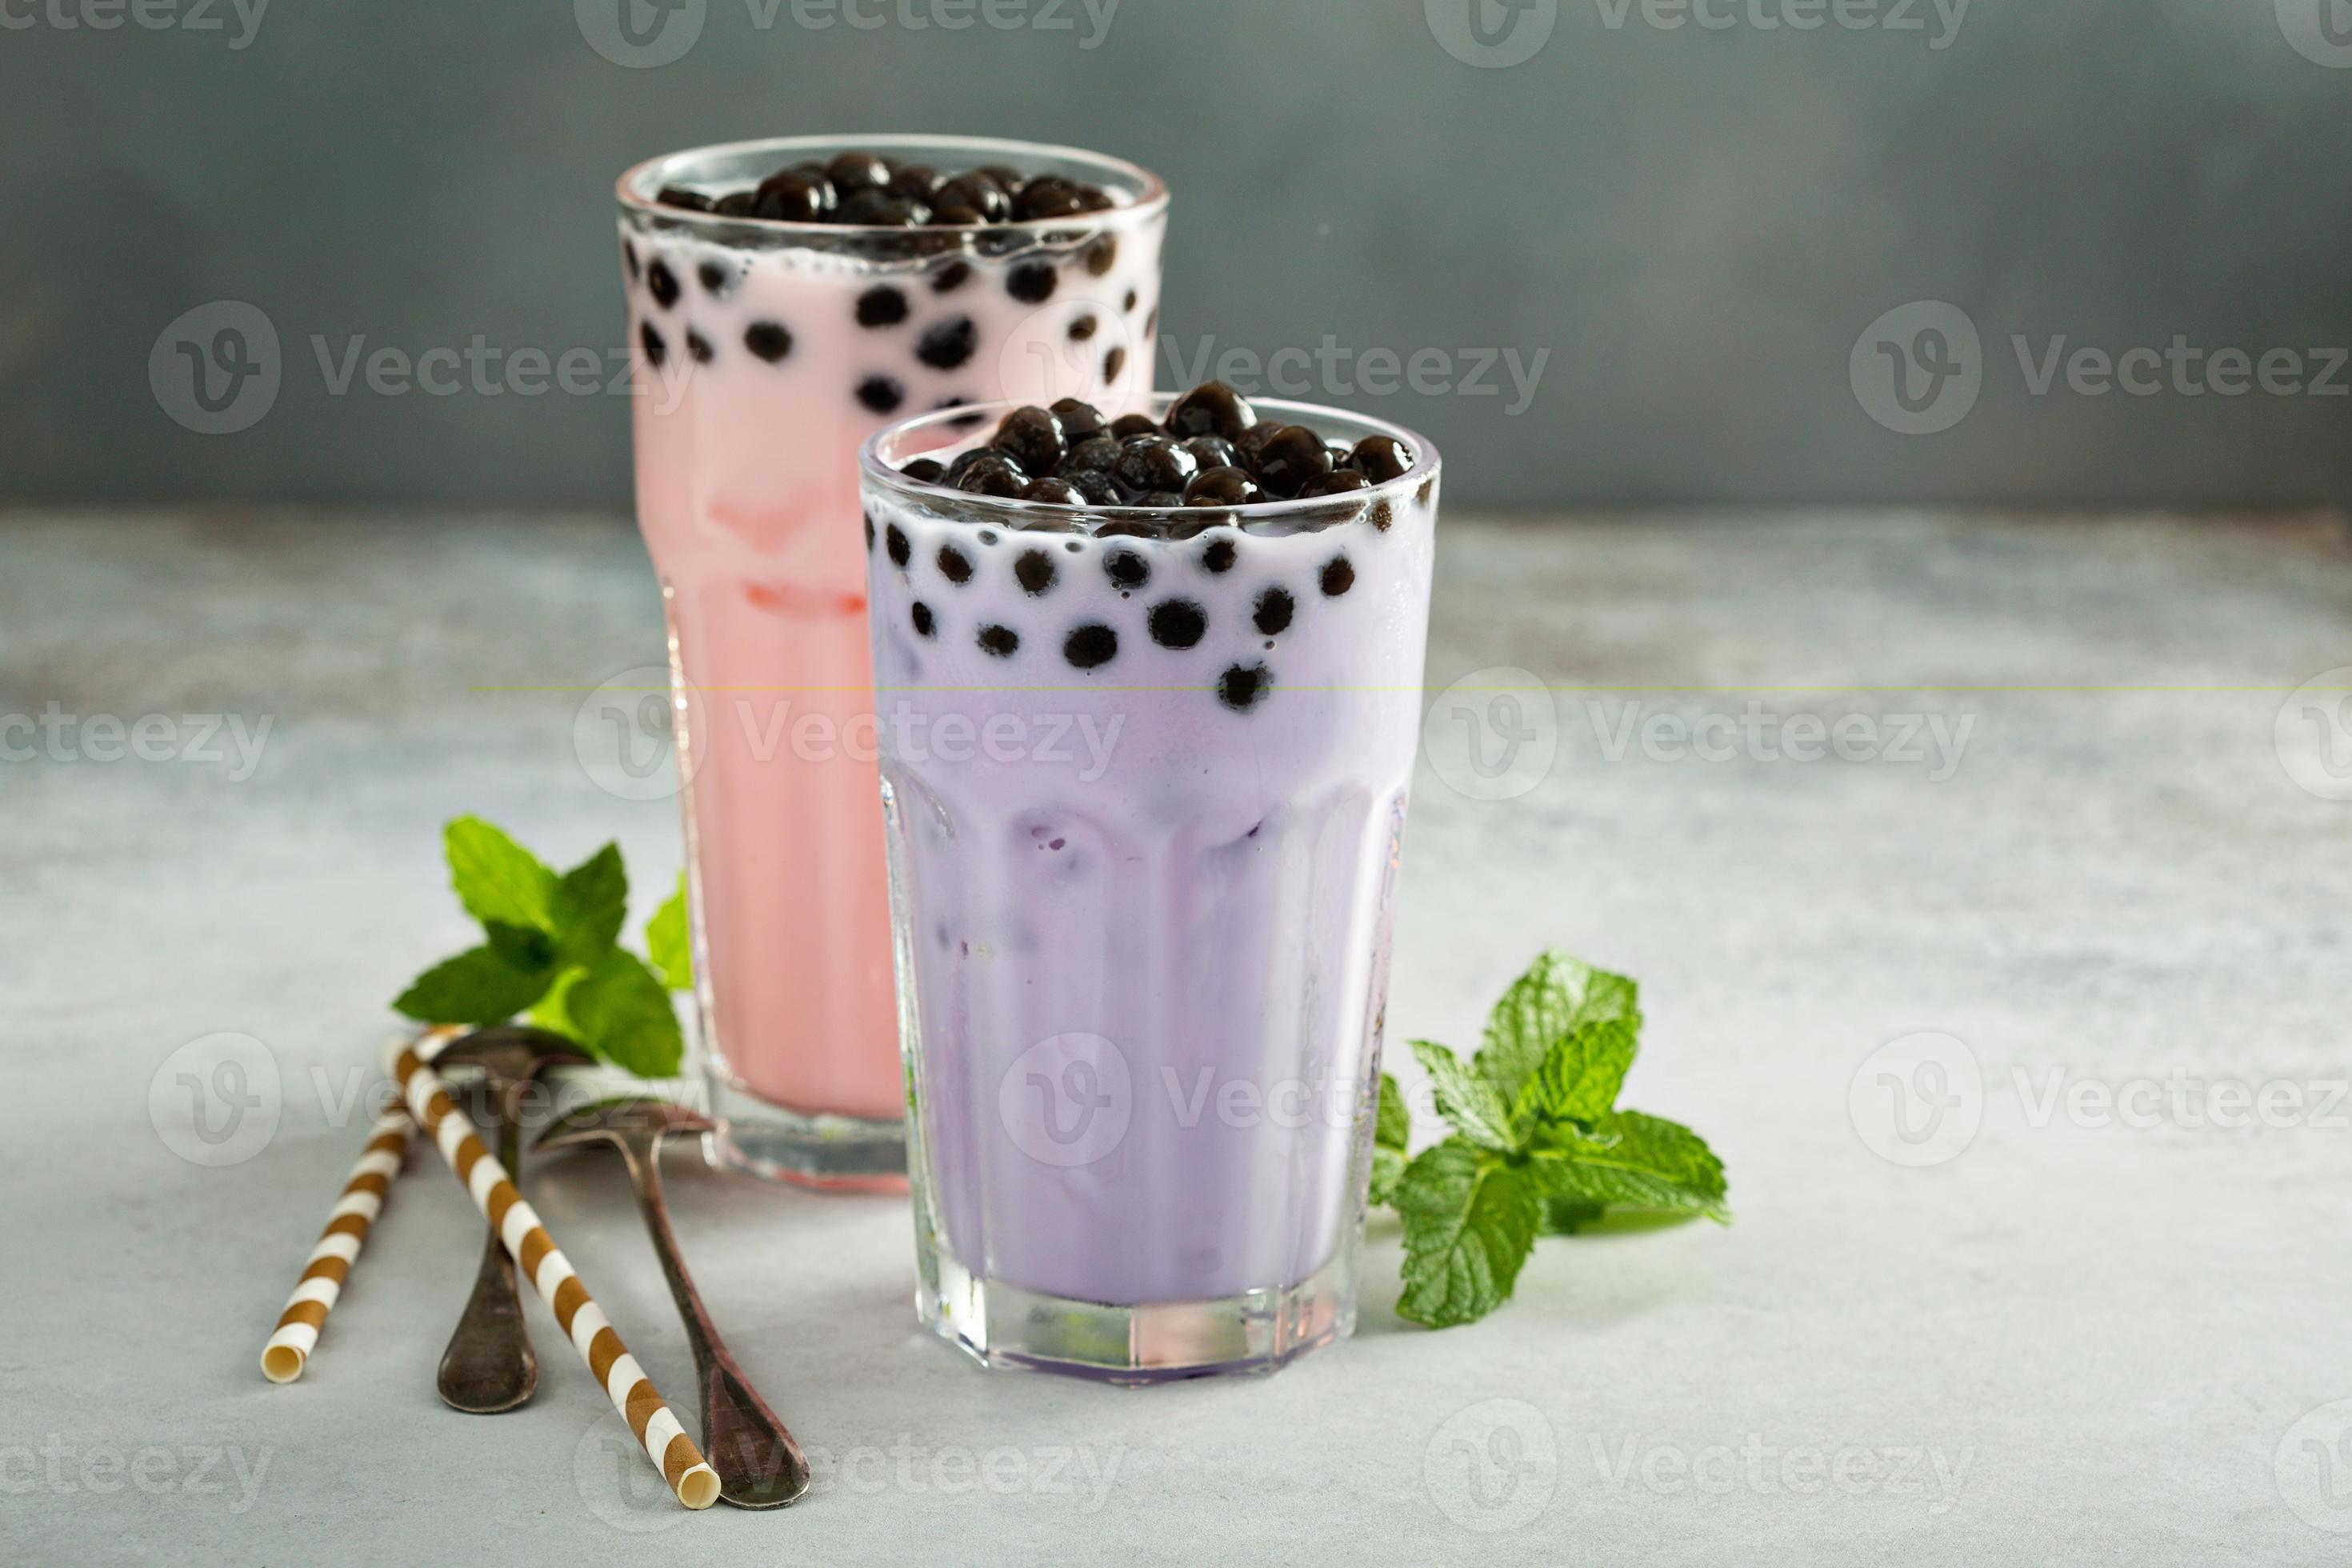 https://static.vecteezy.com/system/resources/previews/015/759/643/large_2x/taro-and-strawberry-milk-bubble-tea-in-tall-glasses-photo.jpg